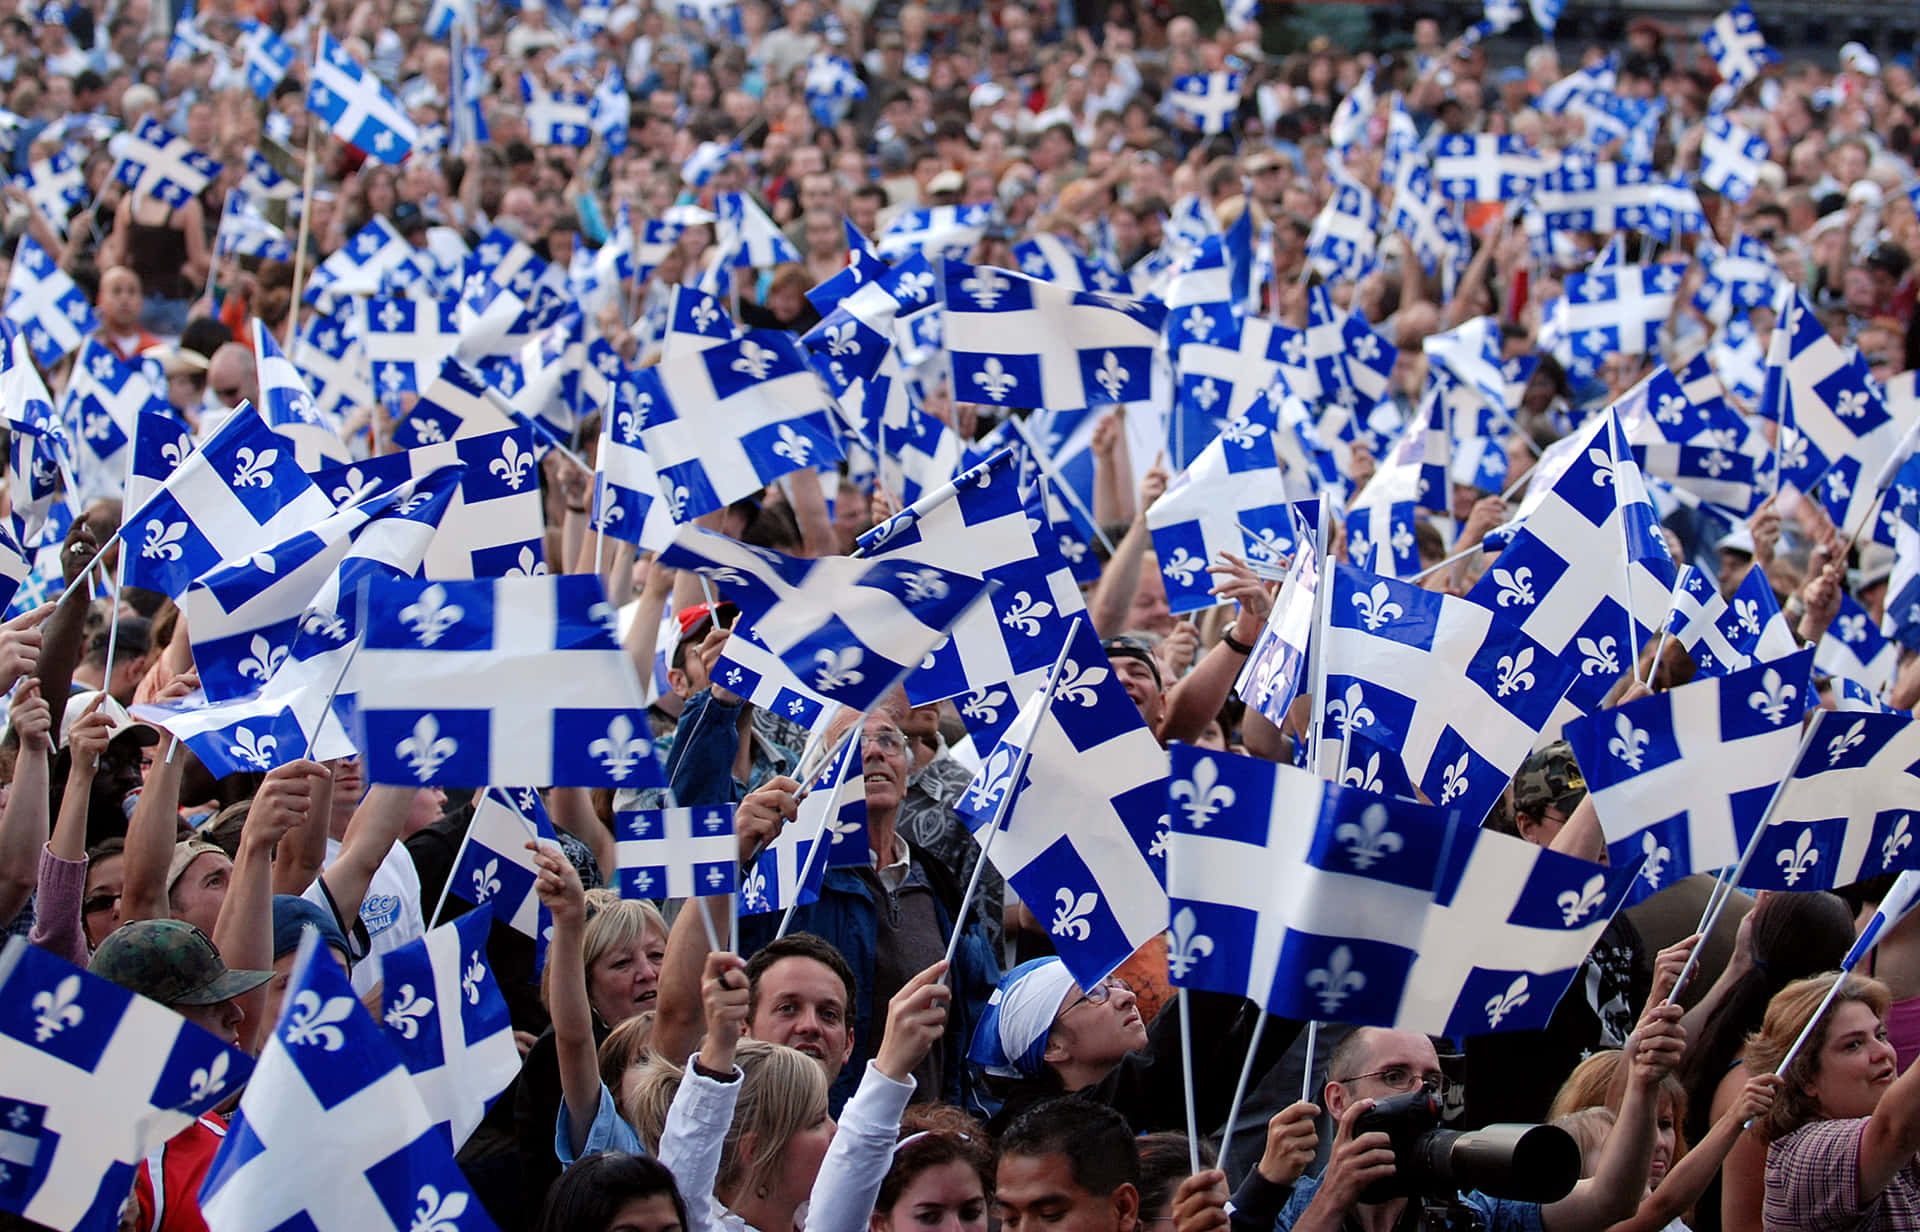 Celebrations Of Saint Jean Baptiste Day In Quebec, Canada Wallpaper